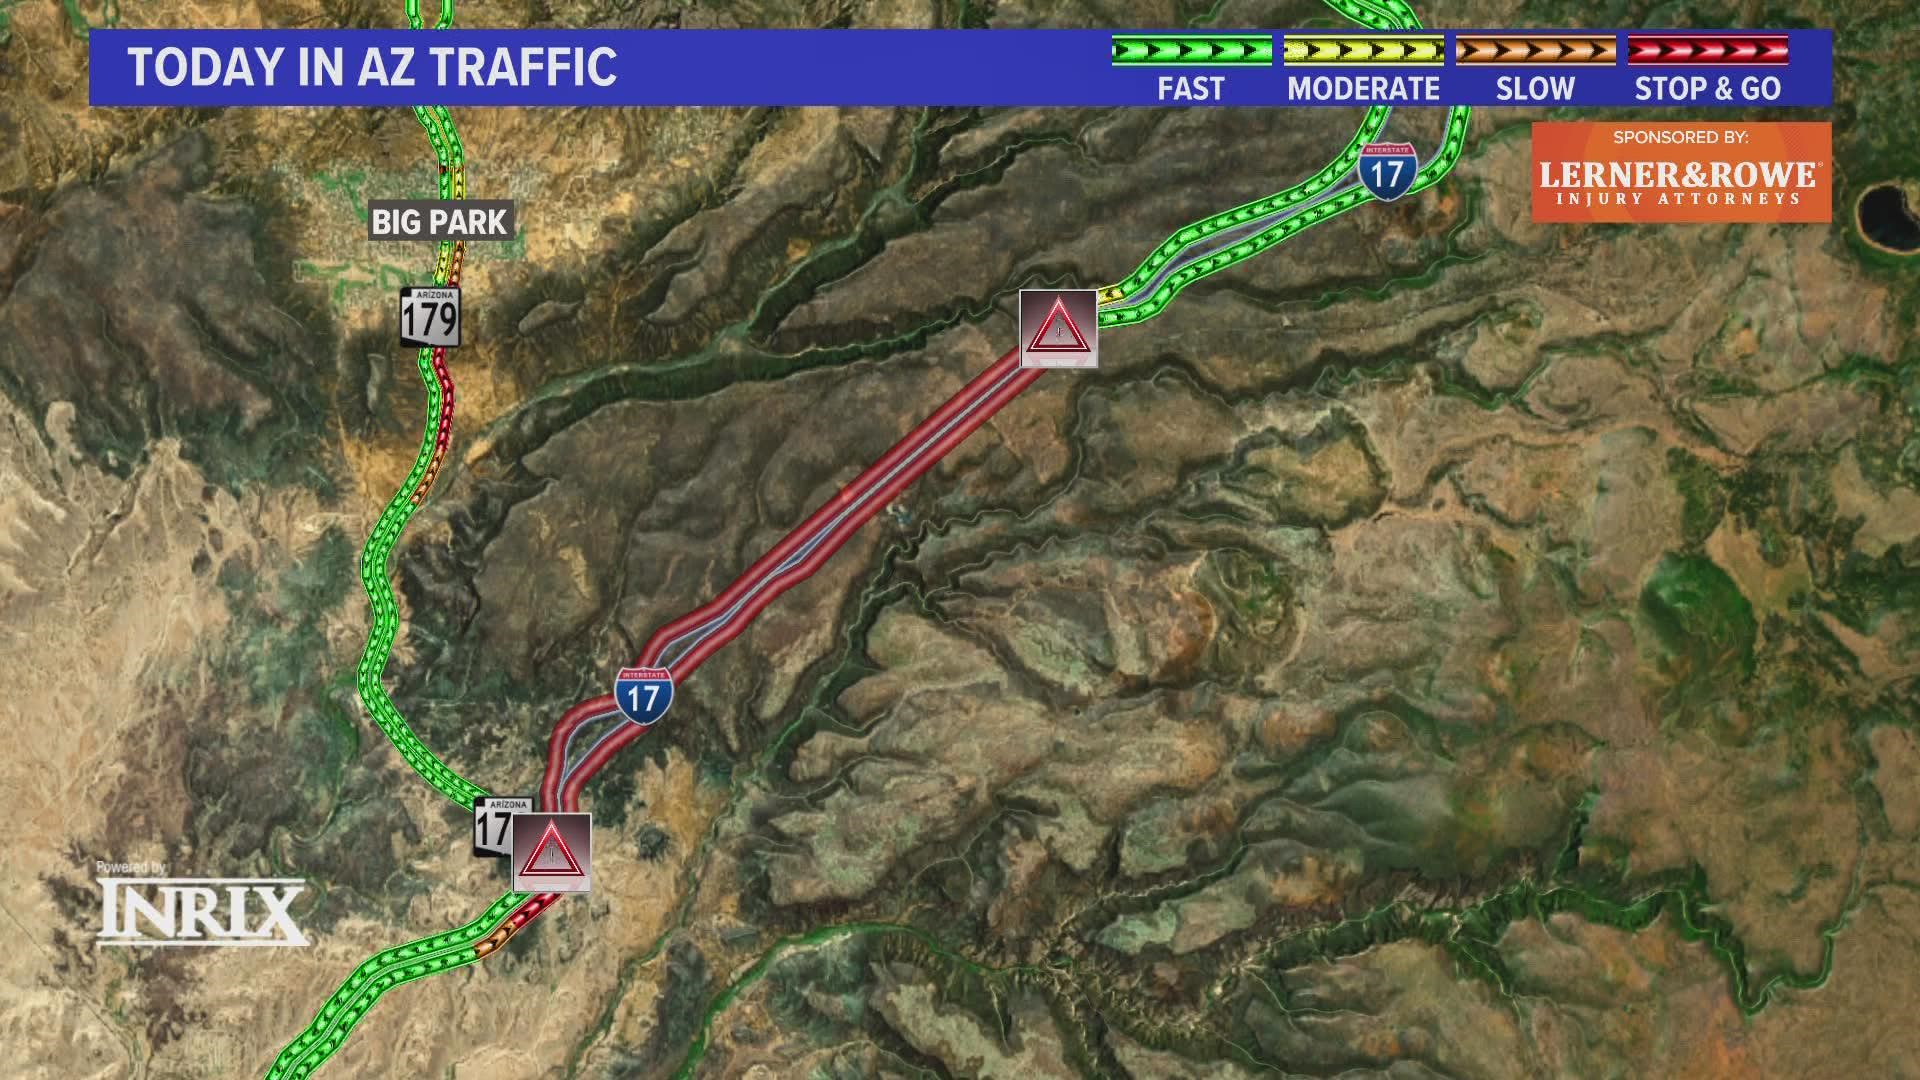 A human-caused wildfire near Sedona caused I-17 to be shut down in both directions on Sunday.